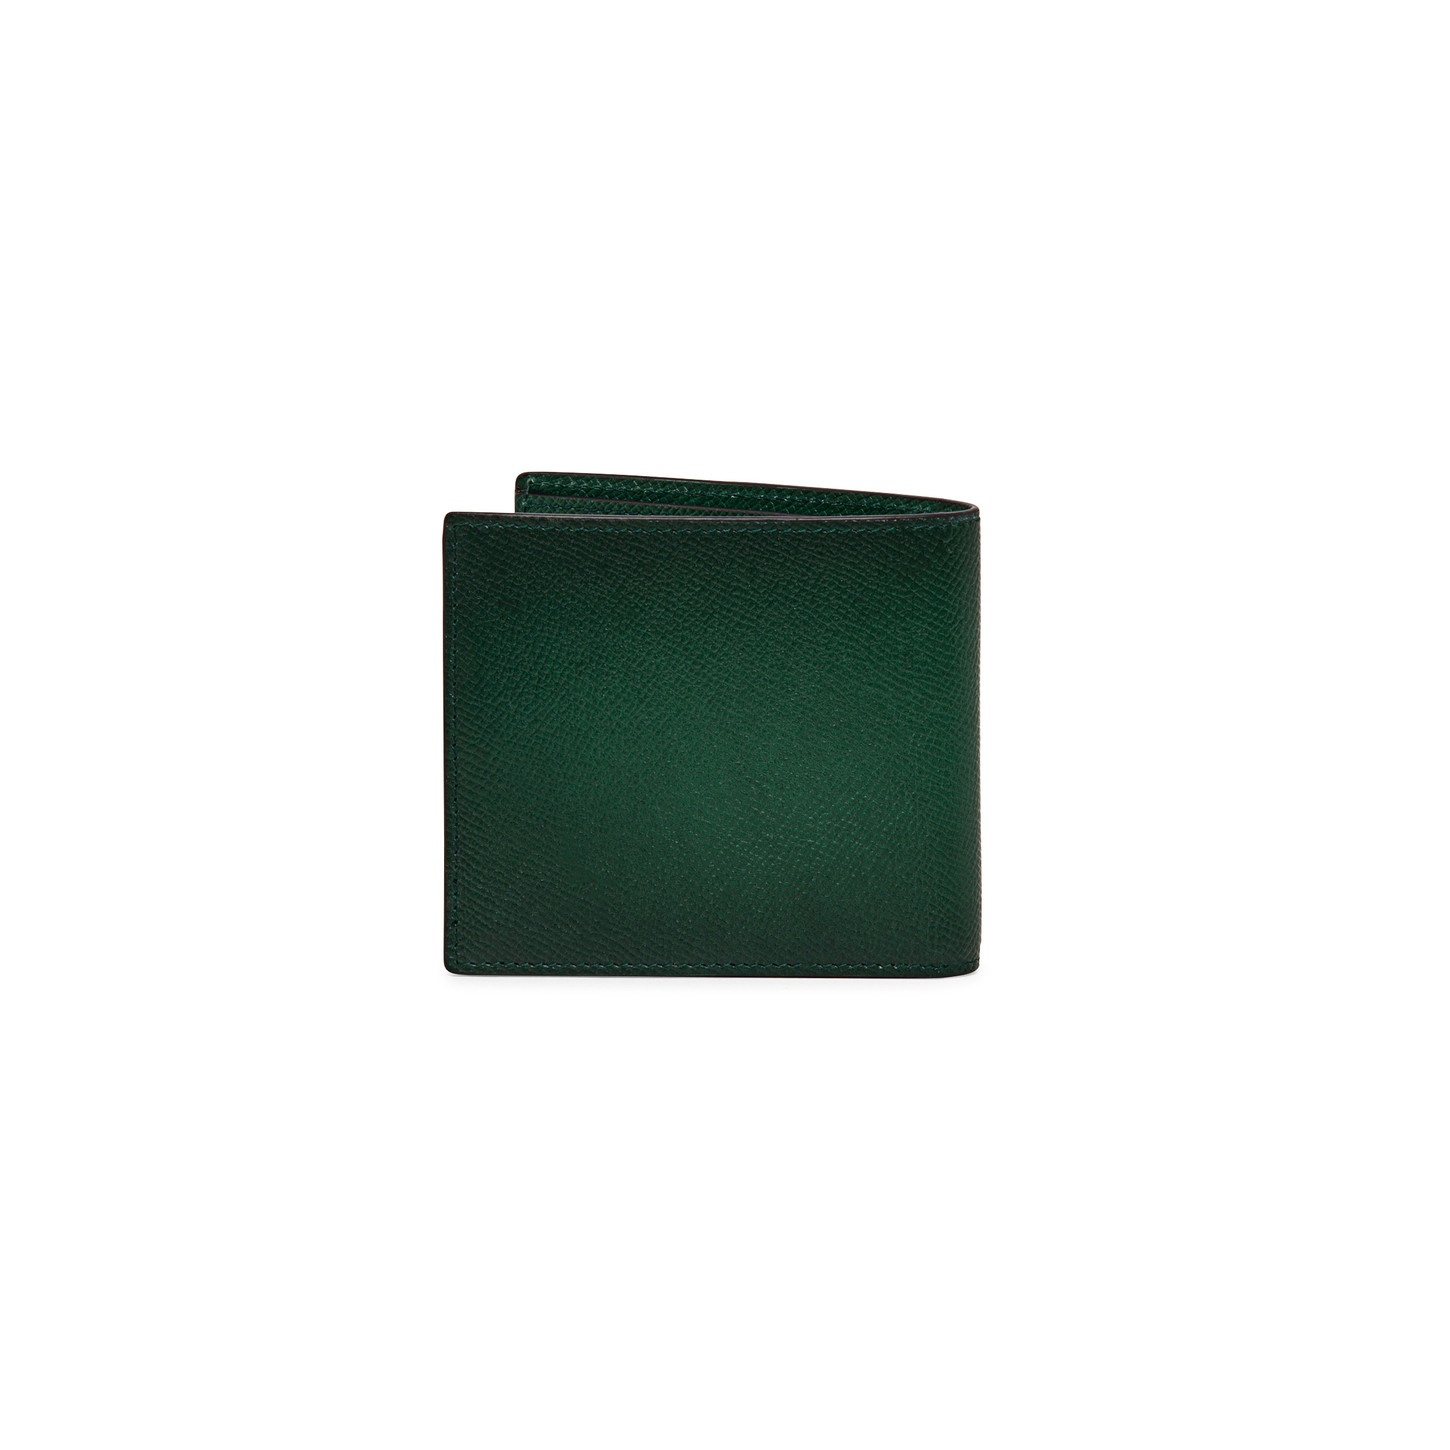 Green saffiano leather wallet - 2